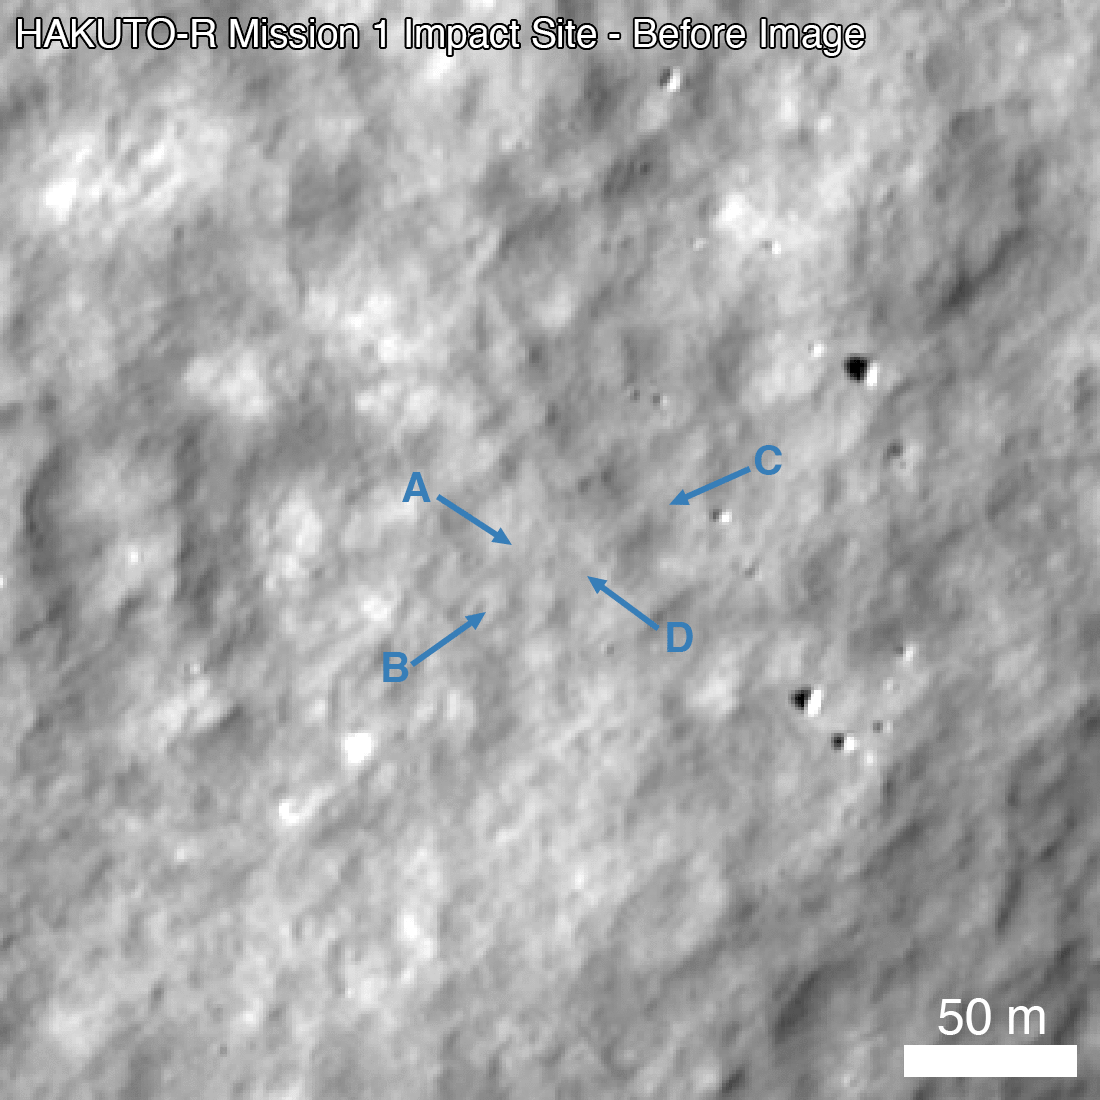 GIF showing before-and-after views of the same gray patch of the moon's surface, with slight changes showing where Japan's private Hakuto-R lander crashed.